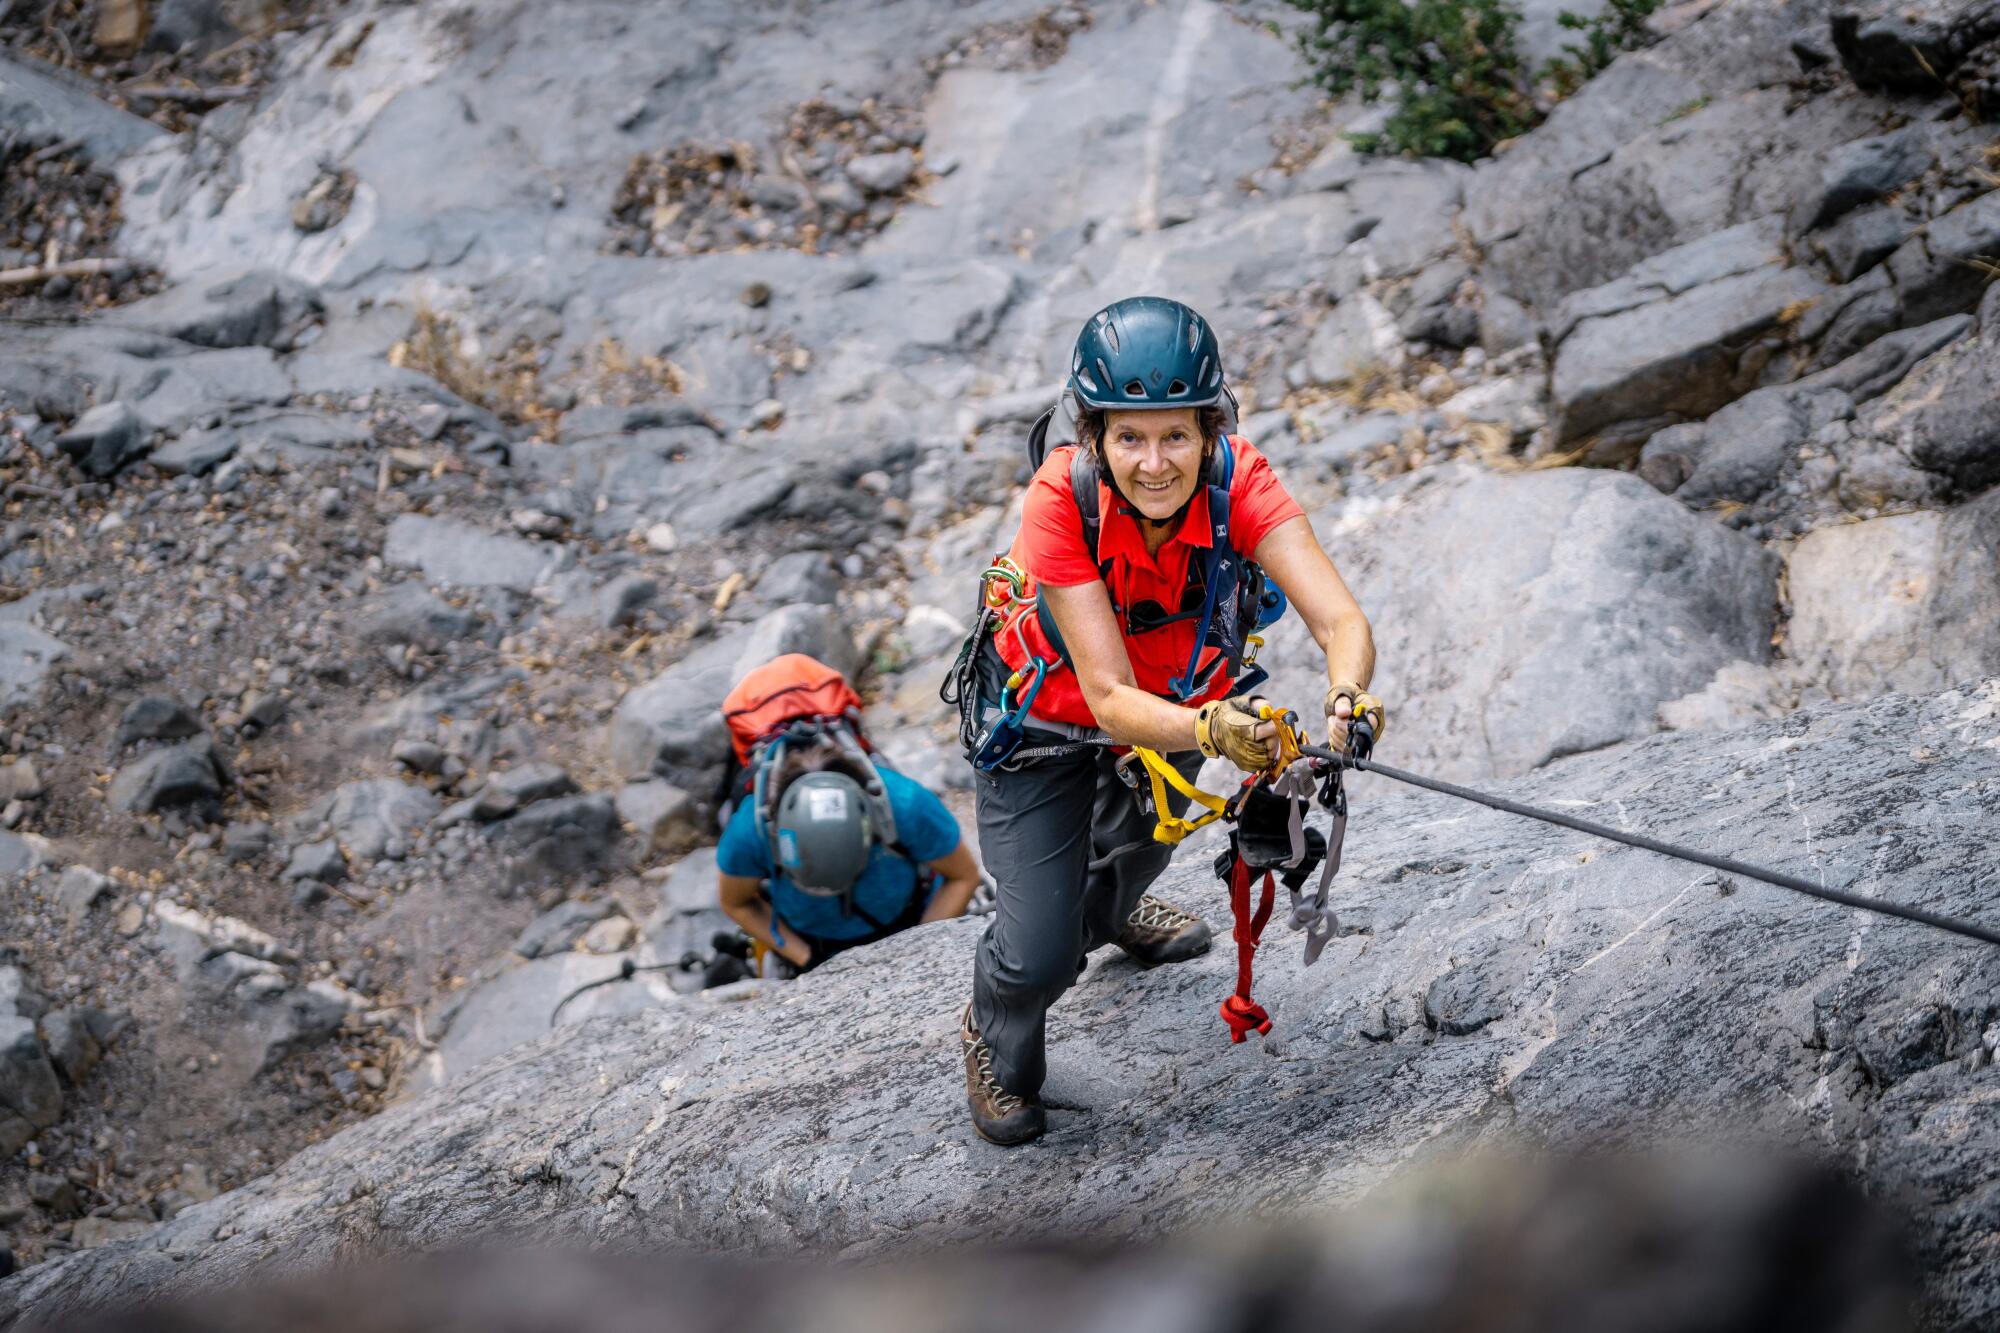 Dierdre Wolownick on her 10-hour climb to the top of El Capitan in the Yosemite Valley in September.